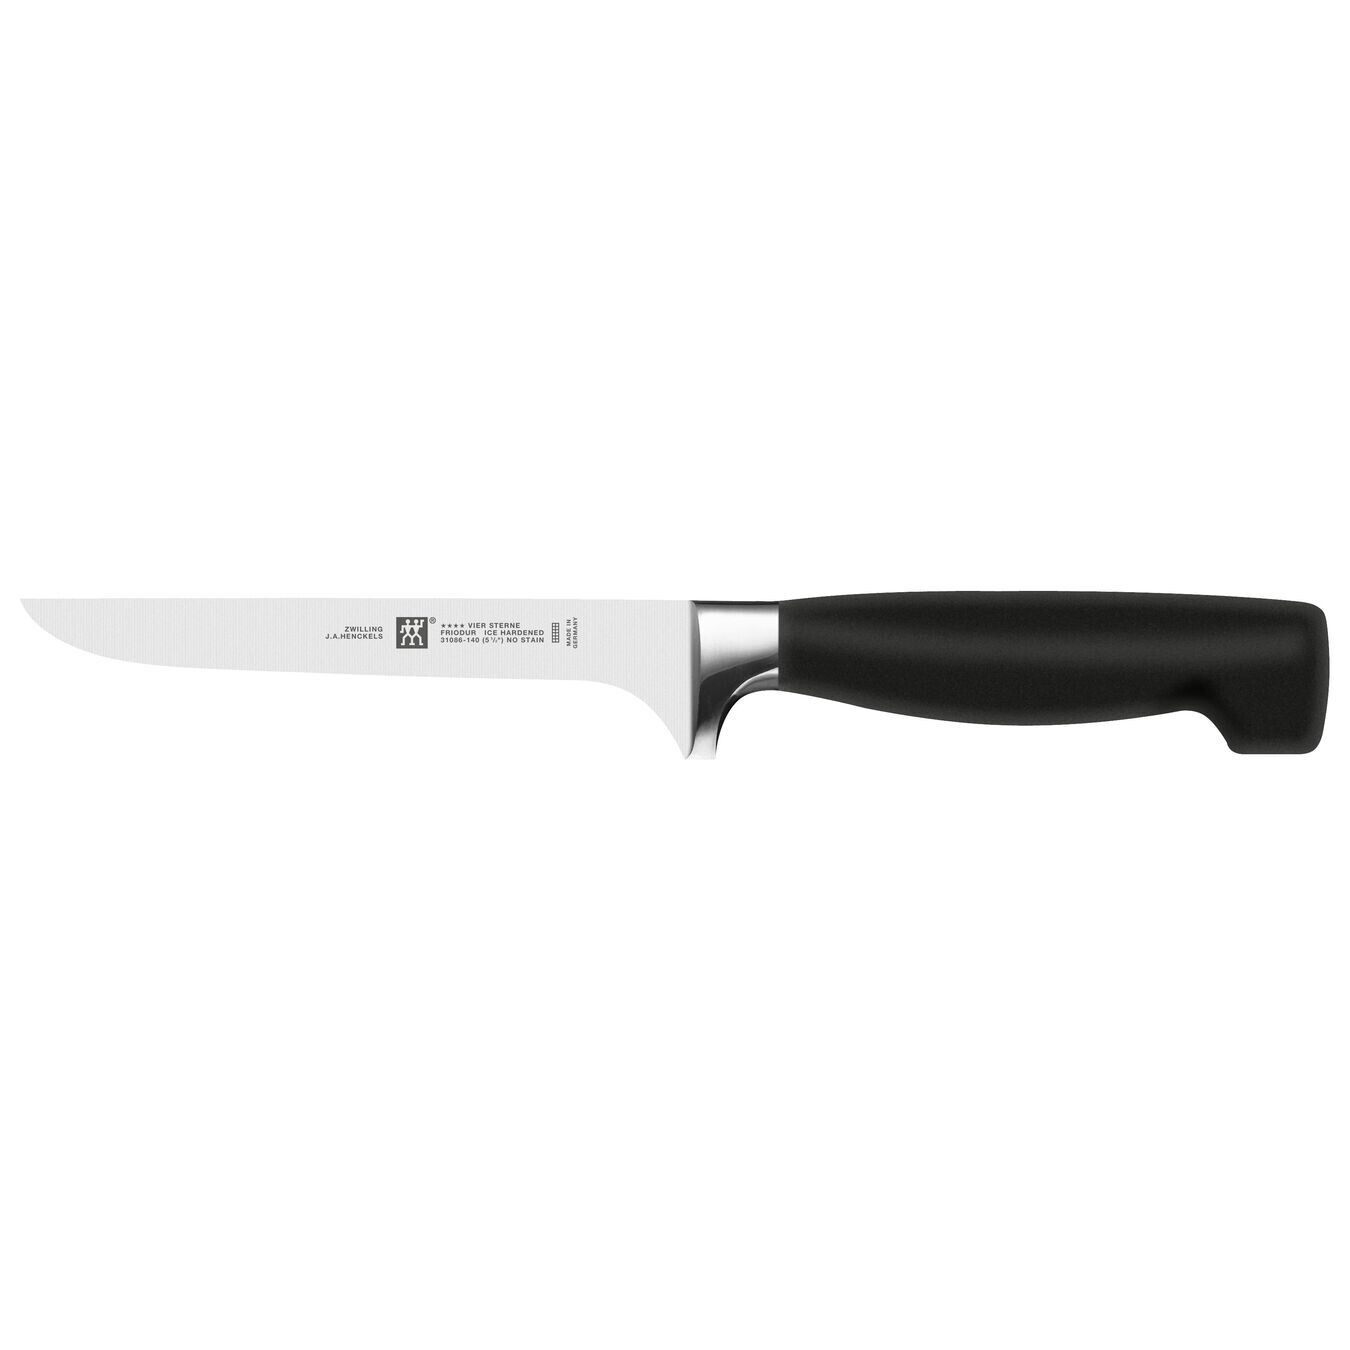 ZWILLING 'four star' uitbeenmes 140mm  PROMO 68,95 -25%